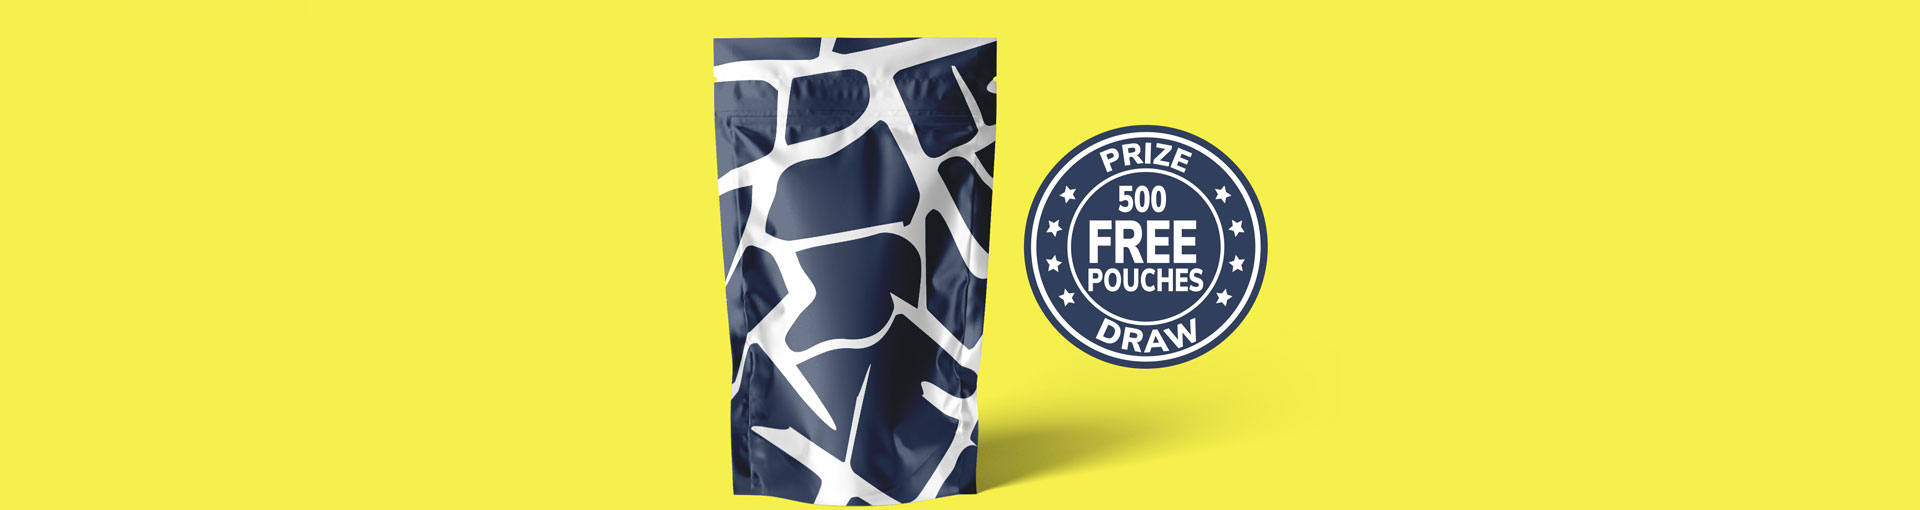 Prize Draw available from The Packaging Lab